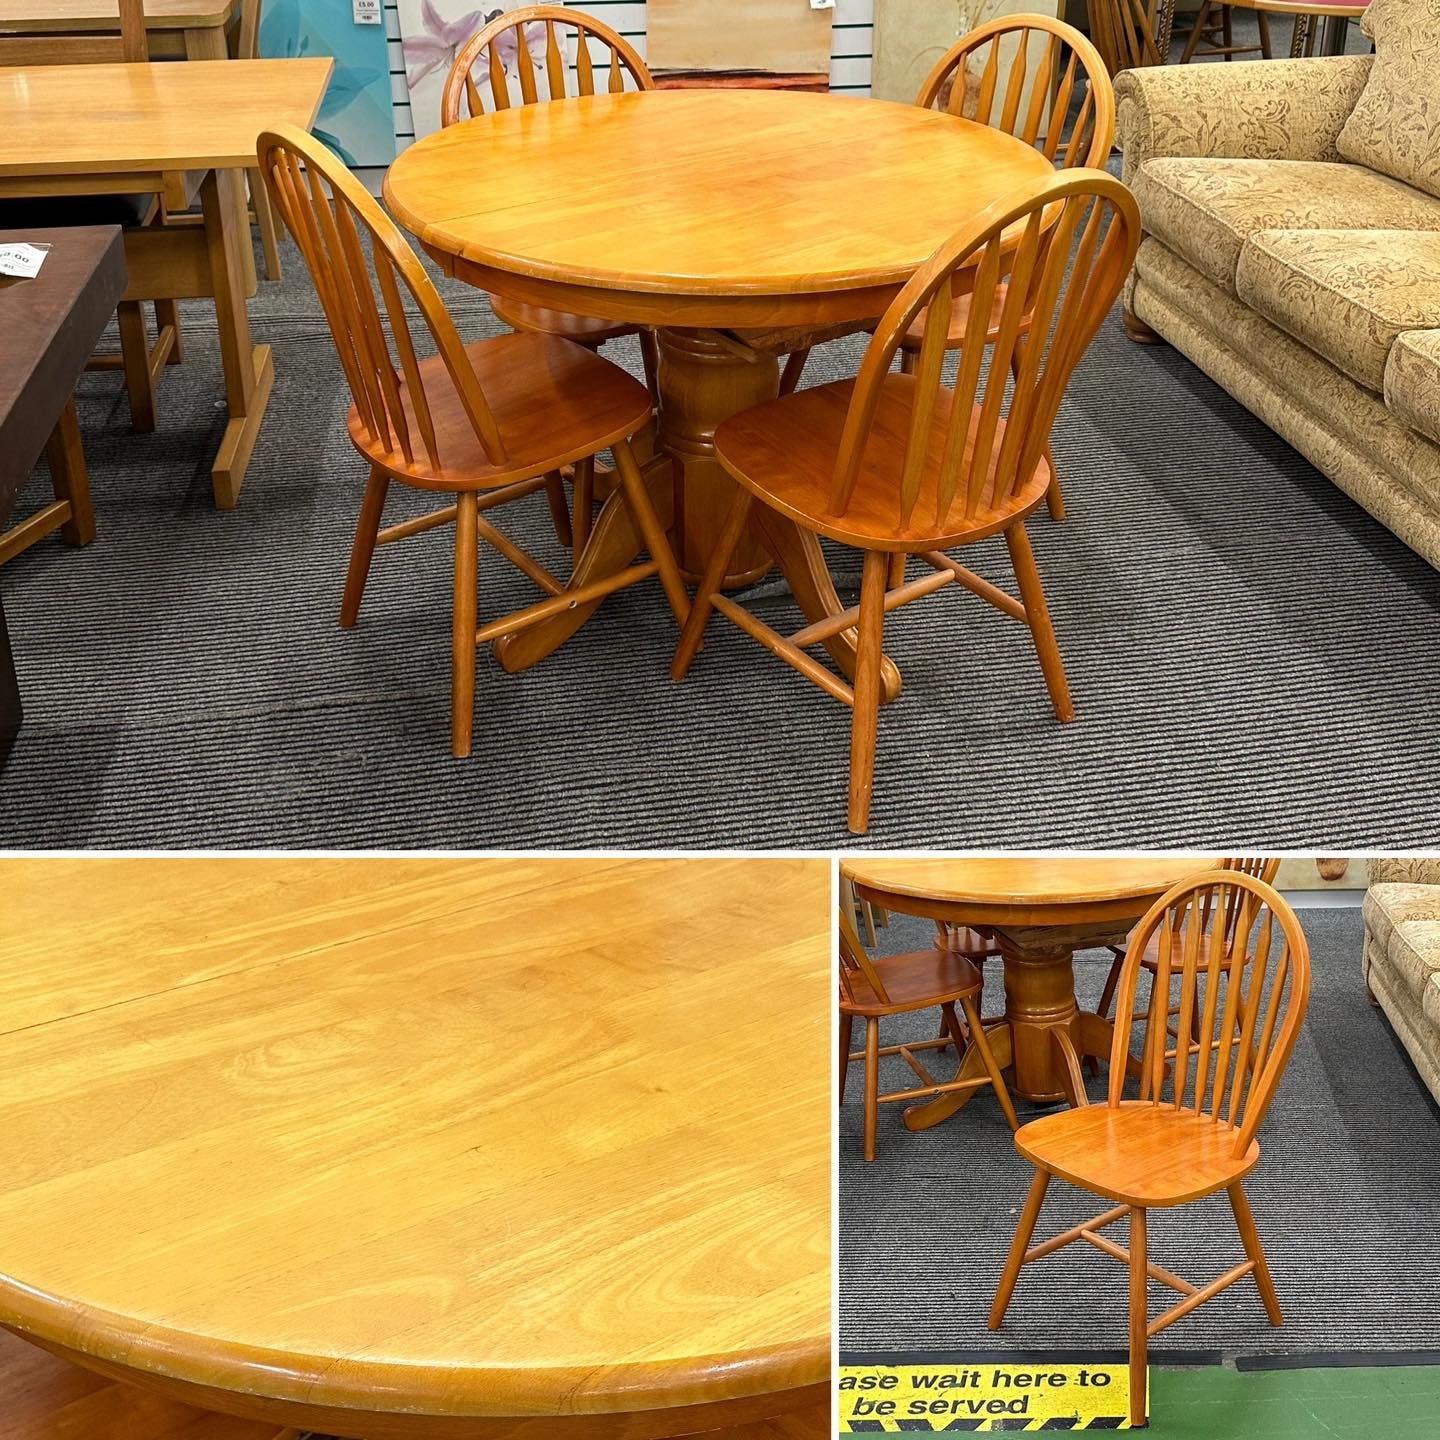 ✨✨ YNYSHIR ✨✨

We have a beautiful selection of pre loved furniture available in our showroom so why not visit us today and grab yourselves a bargain 😁

📞 01443 680090 - Option 2 📞

‼️ Please note as these items are pre owned, they may come with s